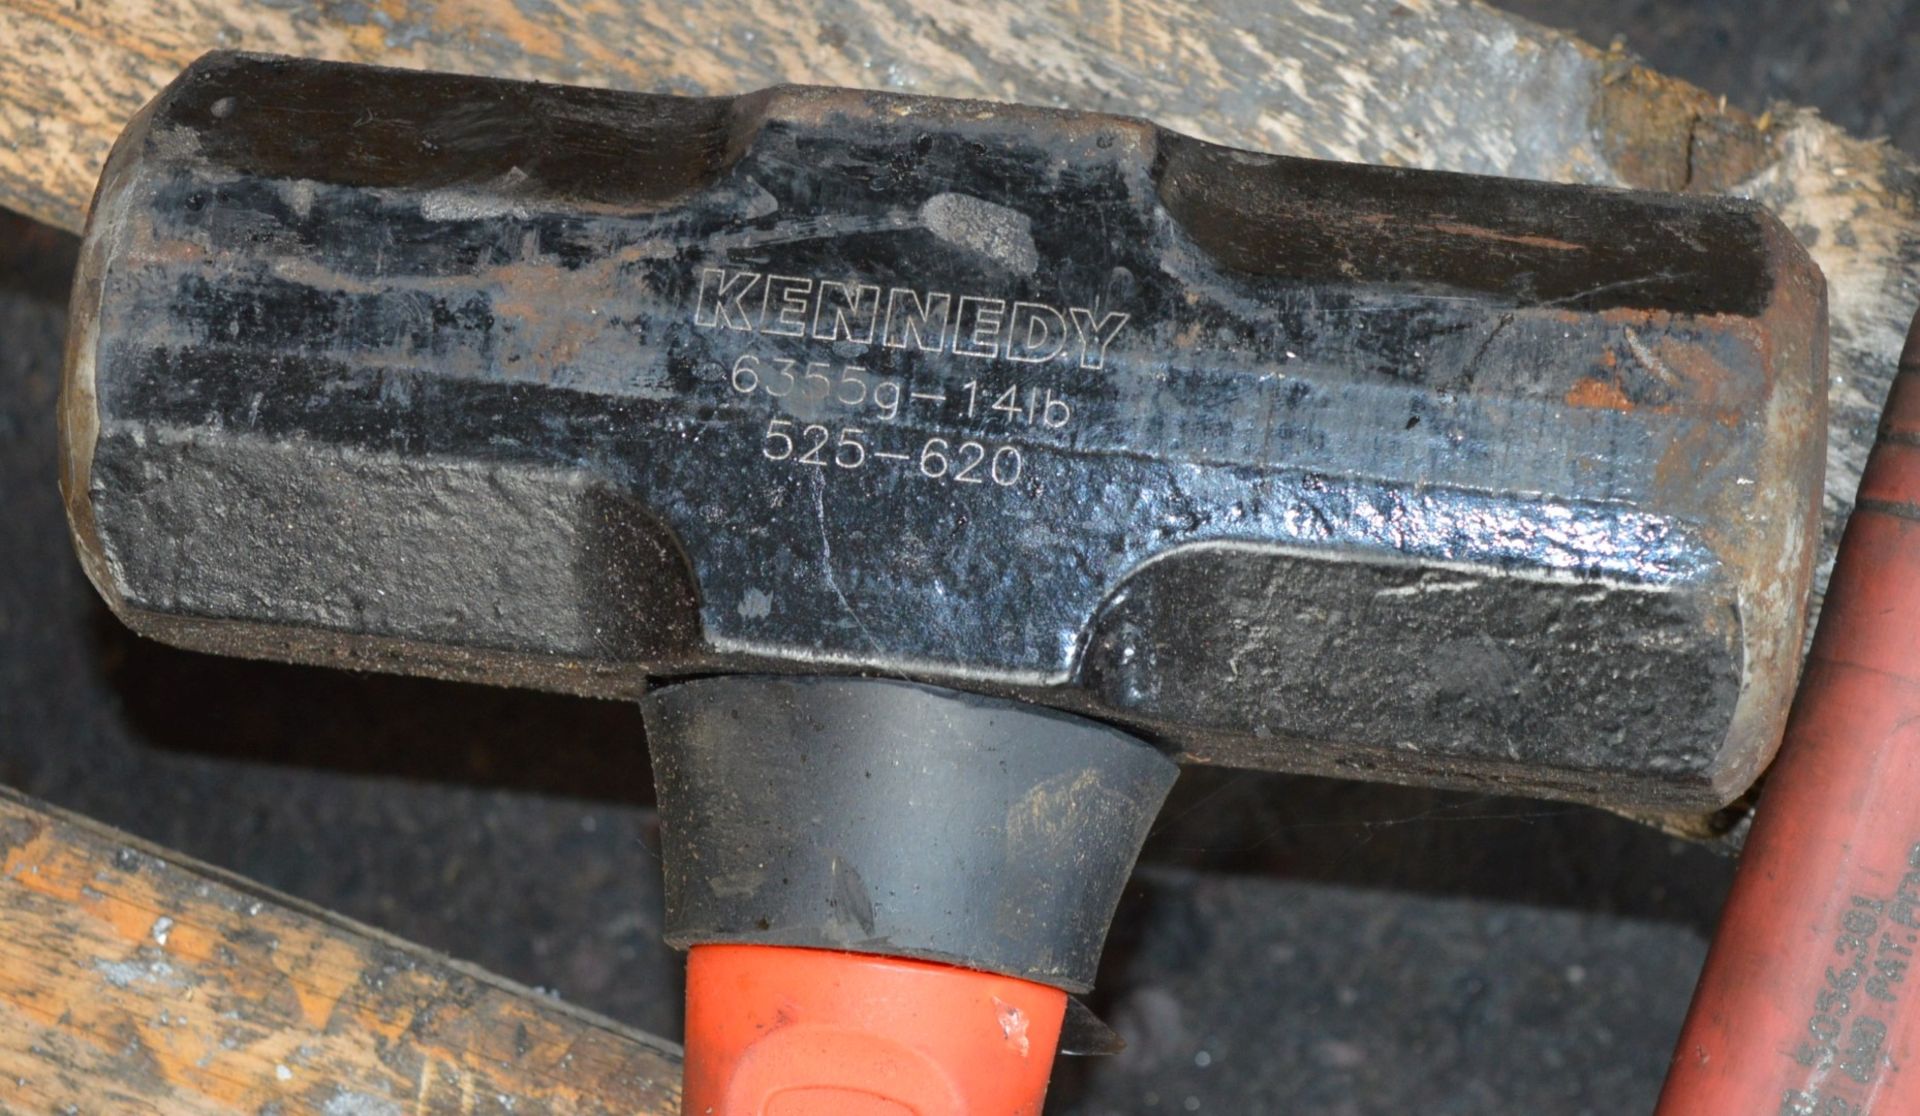 2 x Double Faced 14lb Sledge Hammers - CL202 - Ref EN036 - Location: Worcester WR14 - Image 2 of 3